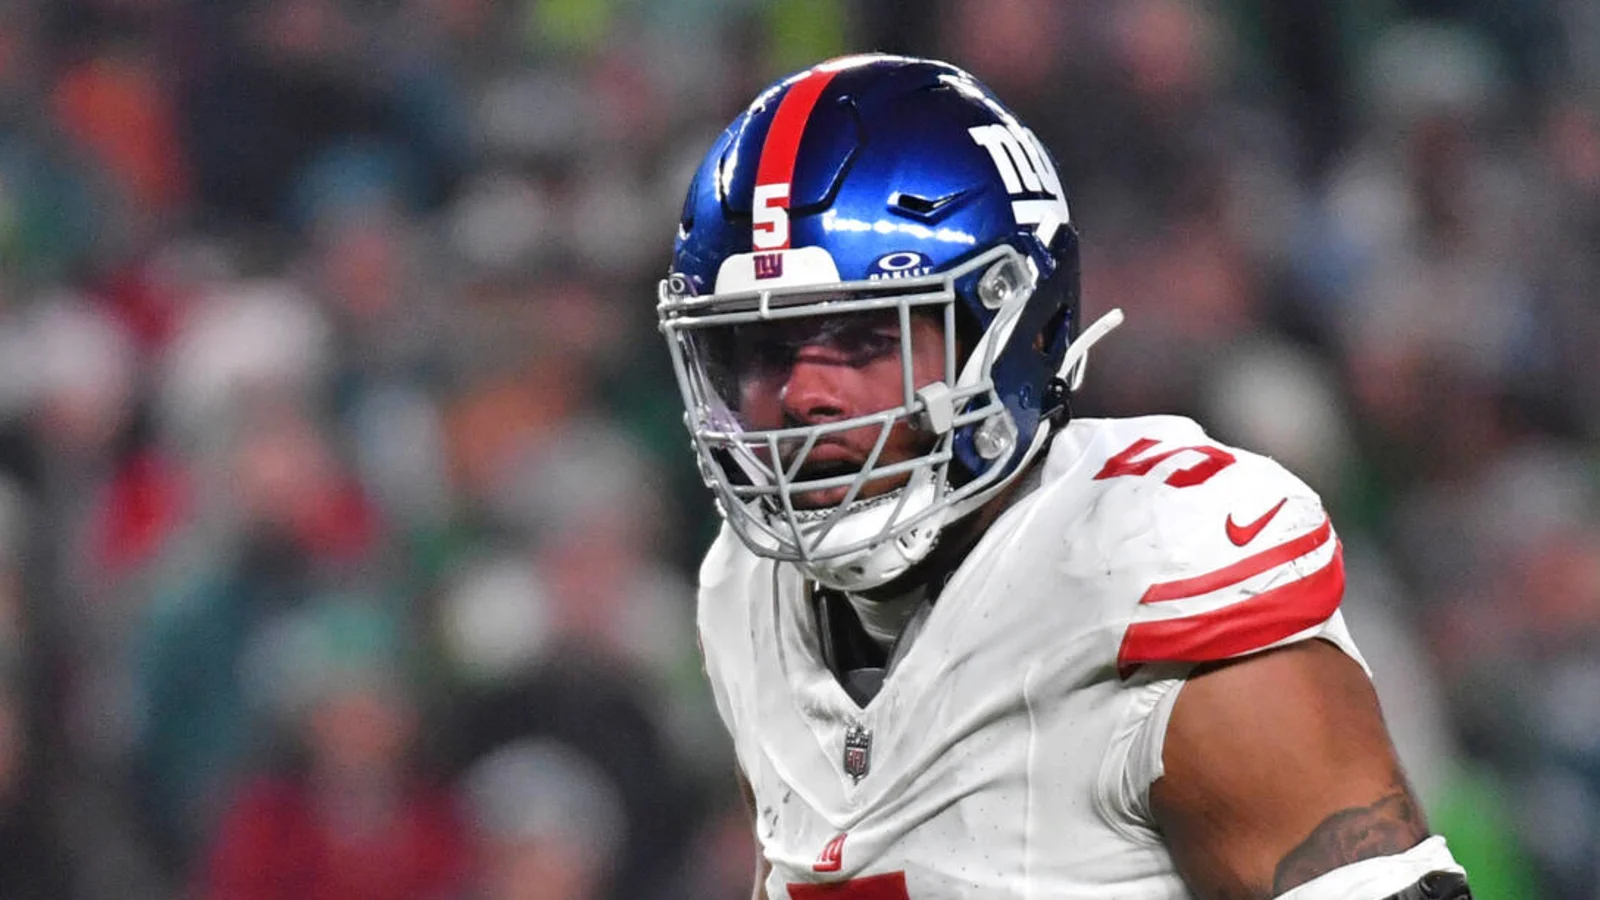 Kayvon Thibodeaux Chasing Greatness and Giants' Legacy in His Third NFL Season